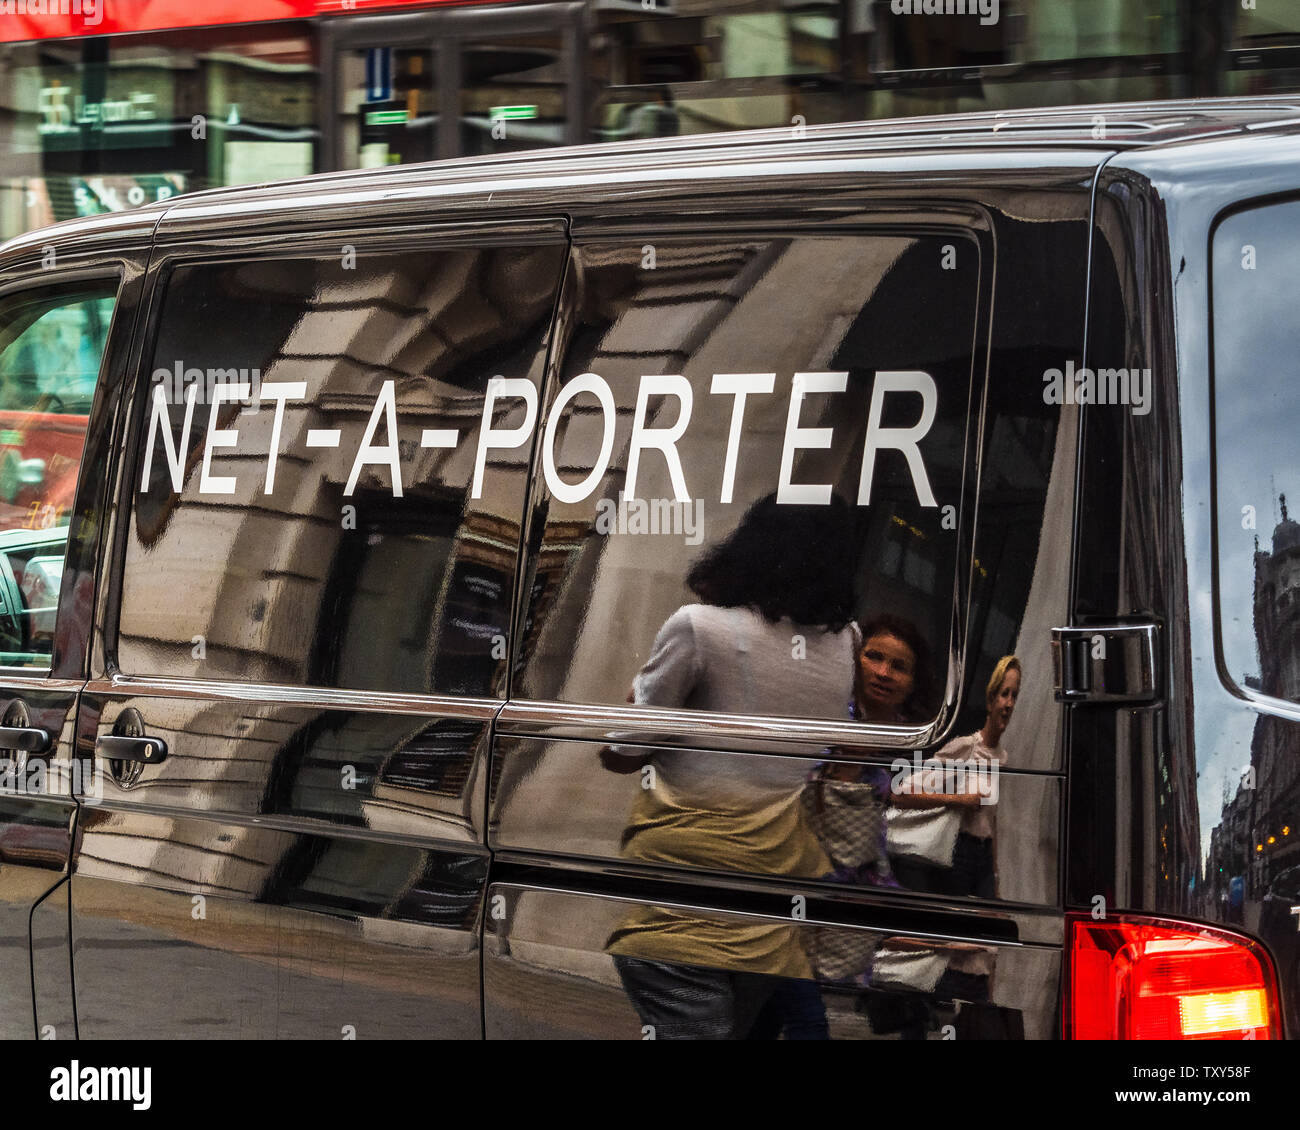 Net a Porter Fashion Delivery Van in Central London - Net-a-Porter is an Italian online fashion retailer created in 2015 Stock Photo